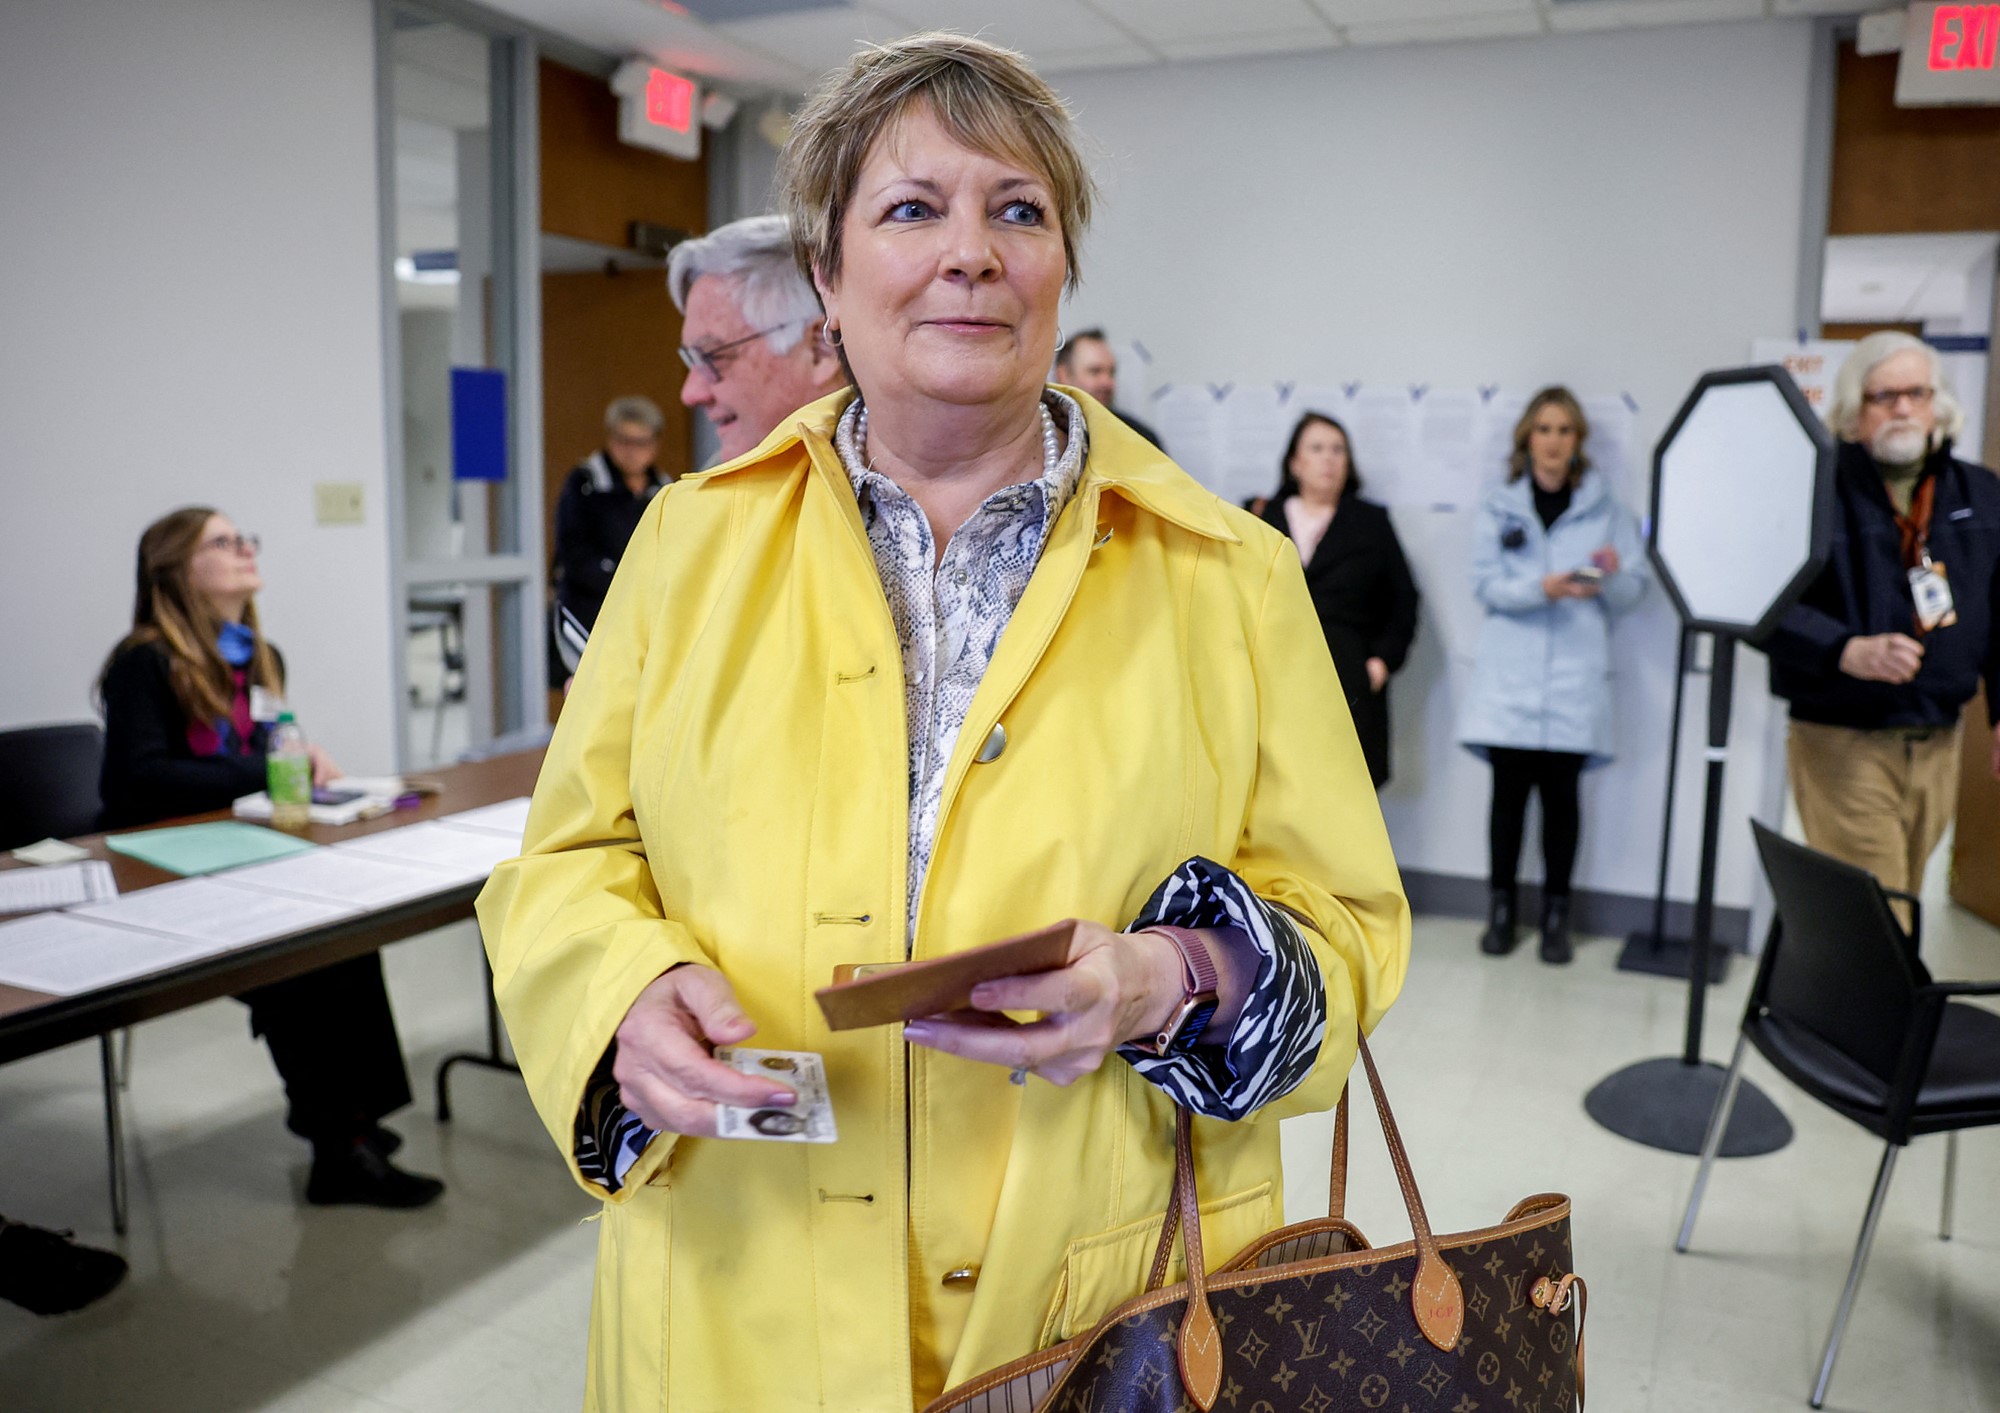 Janet arrives at a polling station in a yellow coat.